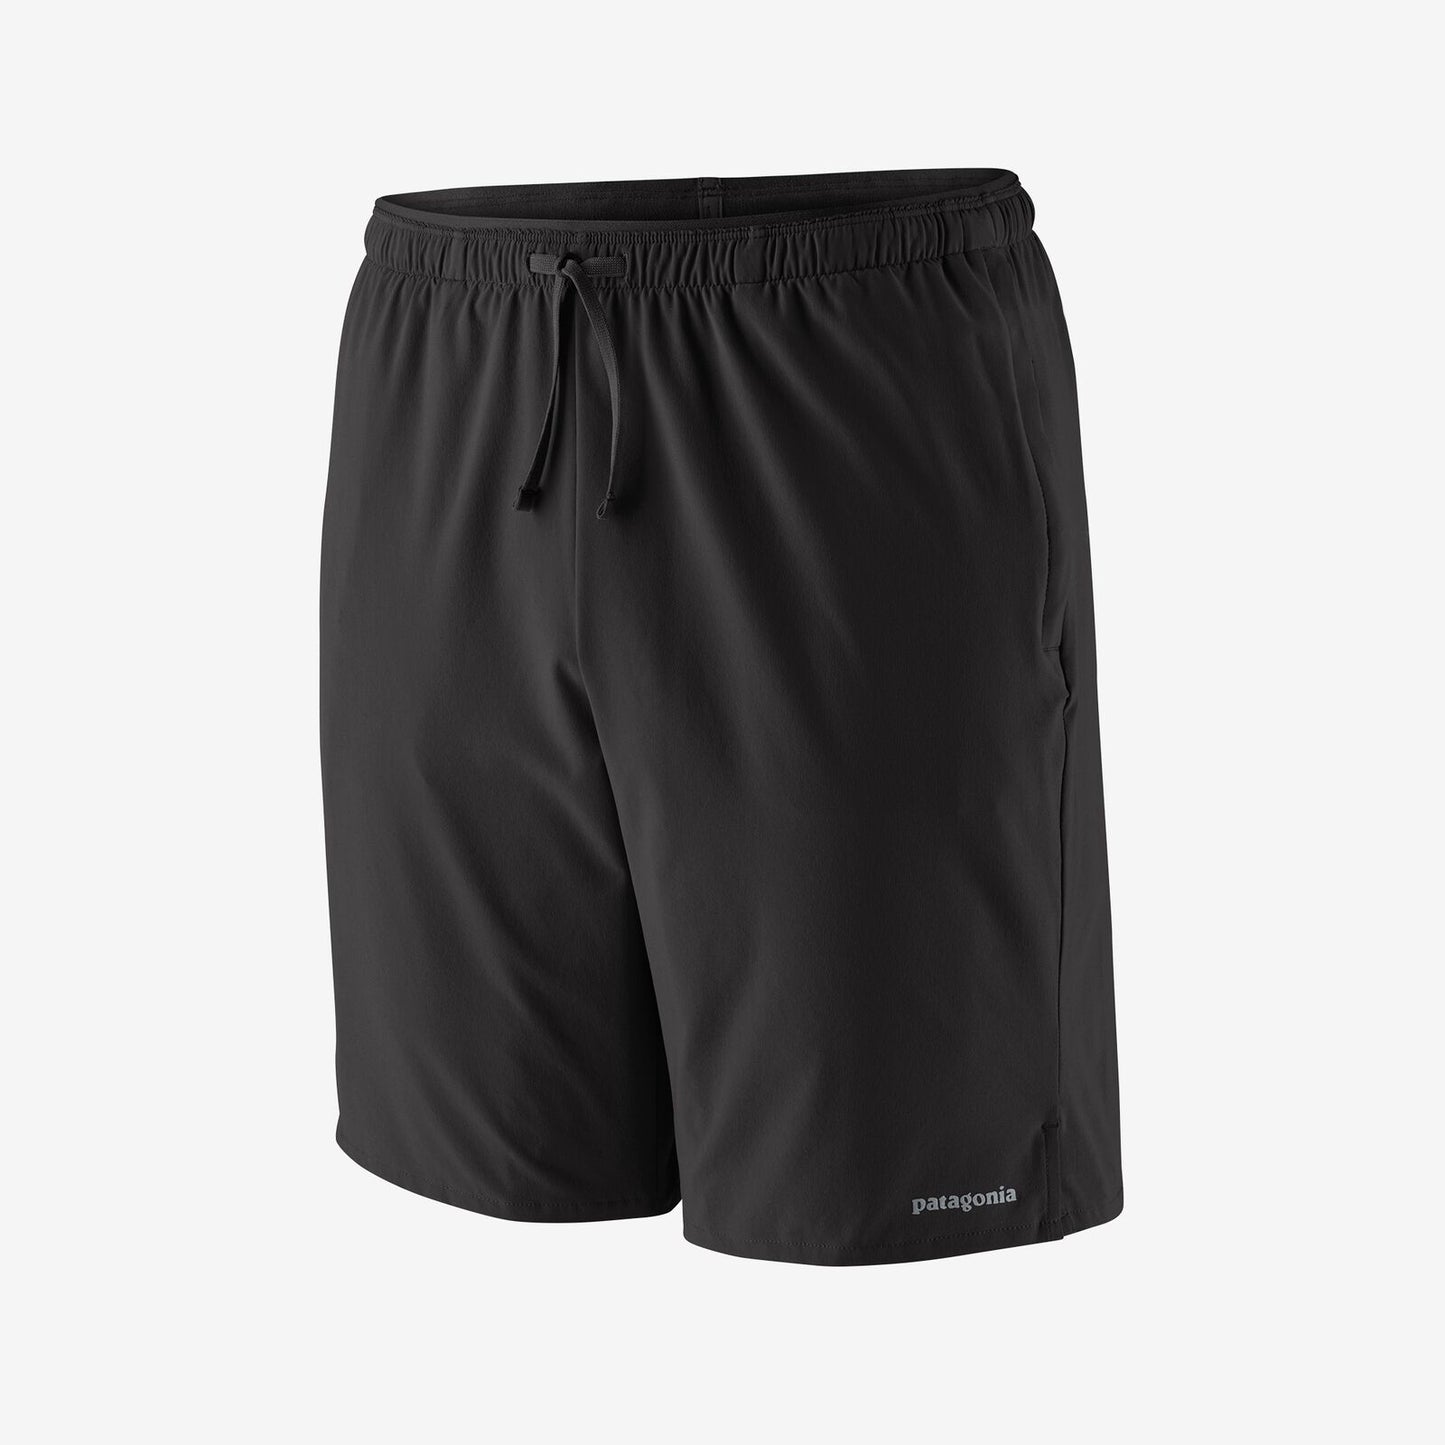 Patagonia Mens Multi Trails Shorts with 8 Inch Inseam in Black